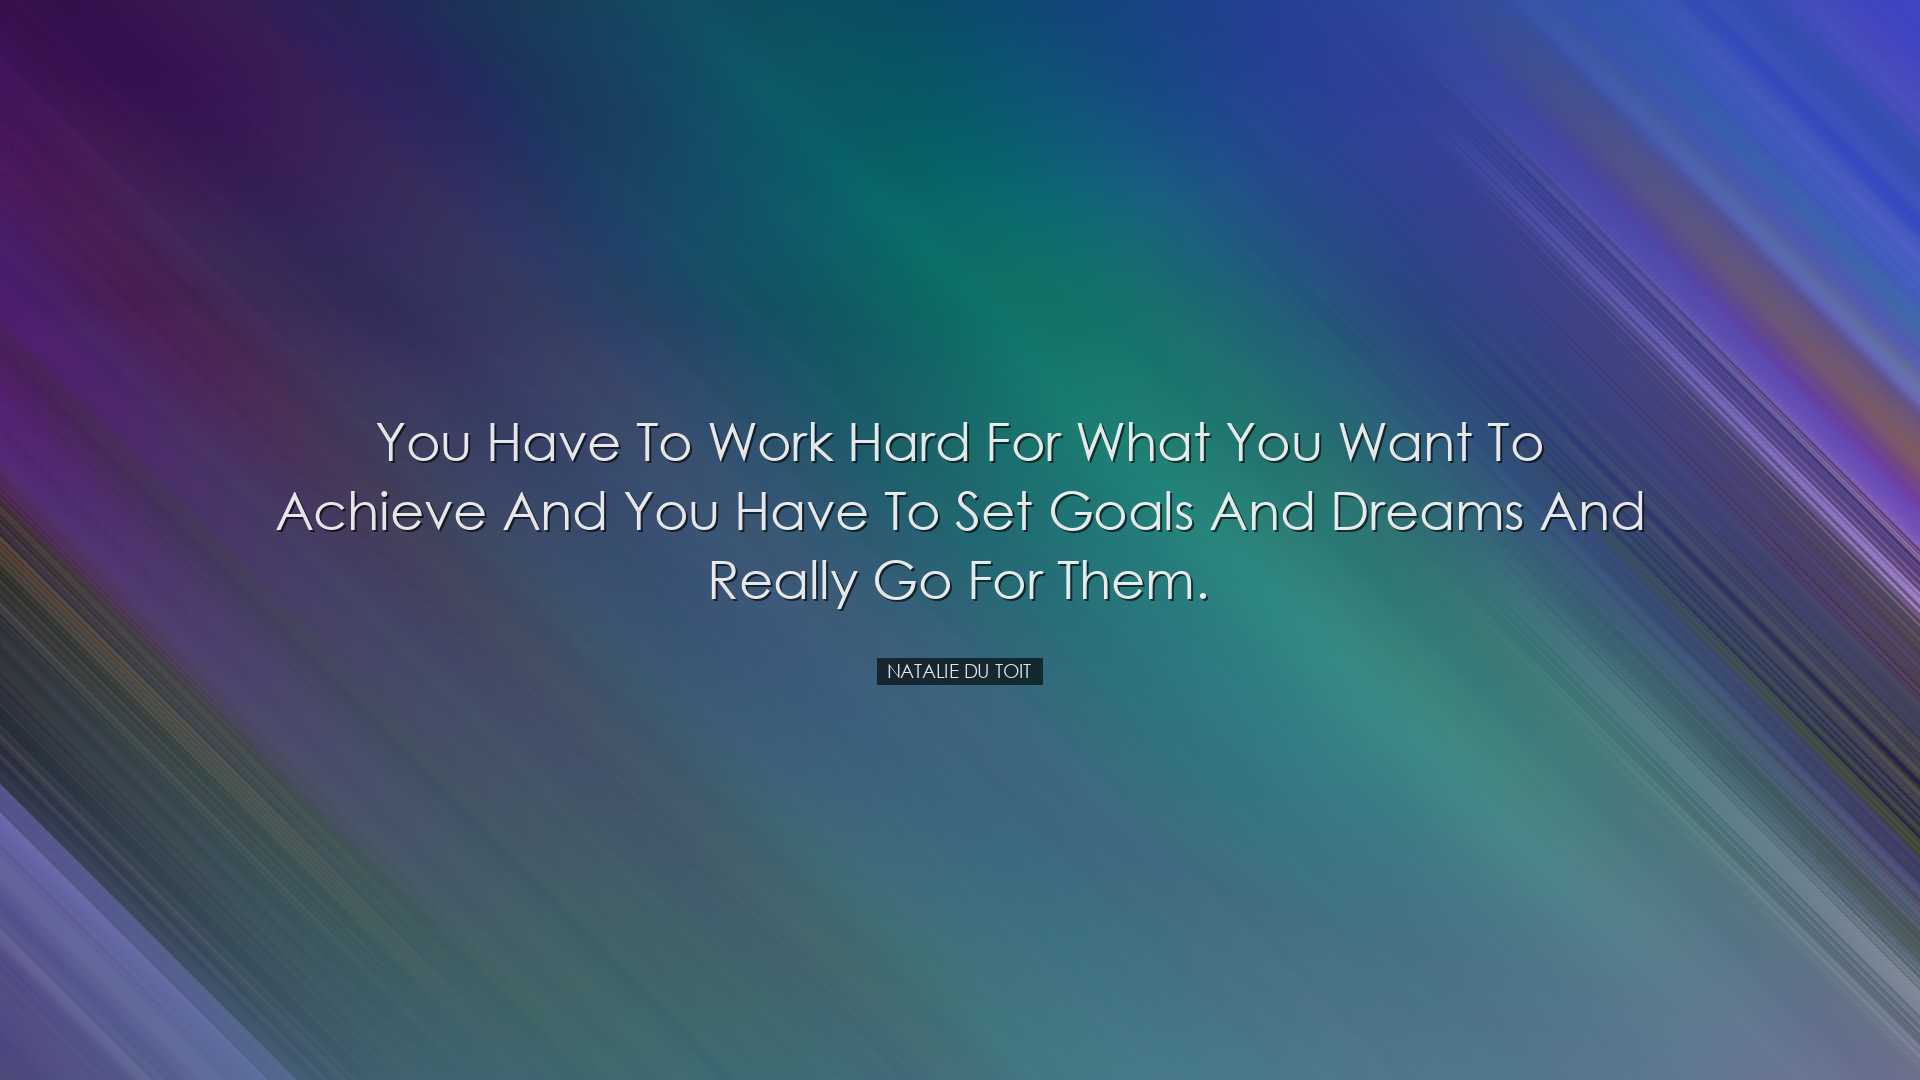 You have to work hard for what you want to achieve and you have to